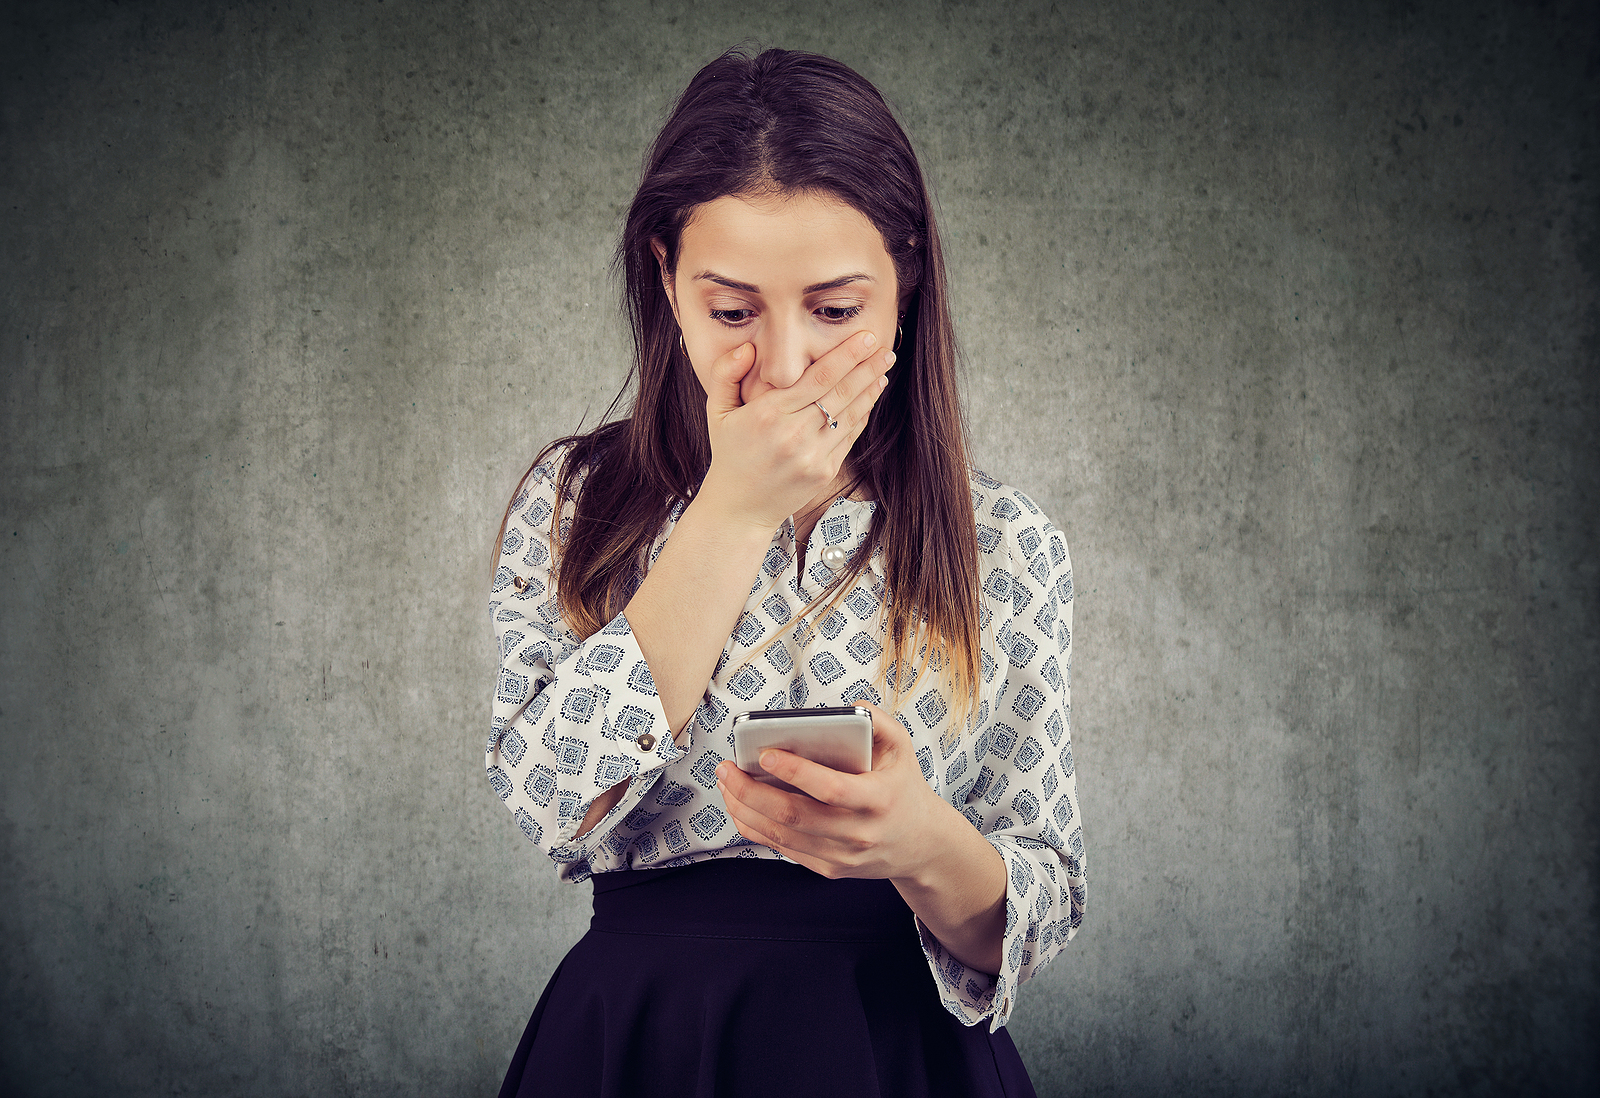 Young woman covering mouth in astonishment while reading message on smartphone looking stunned.